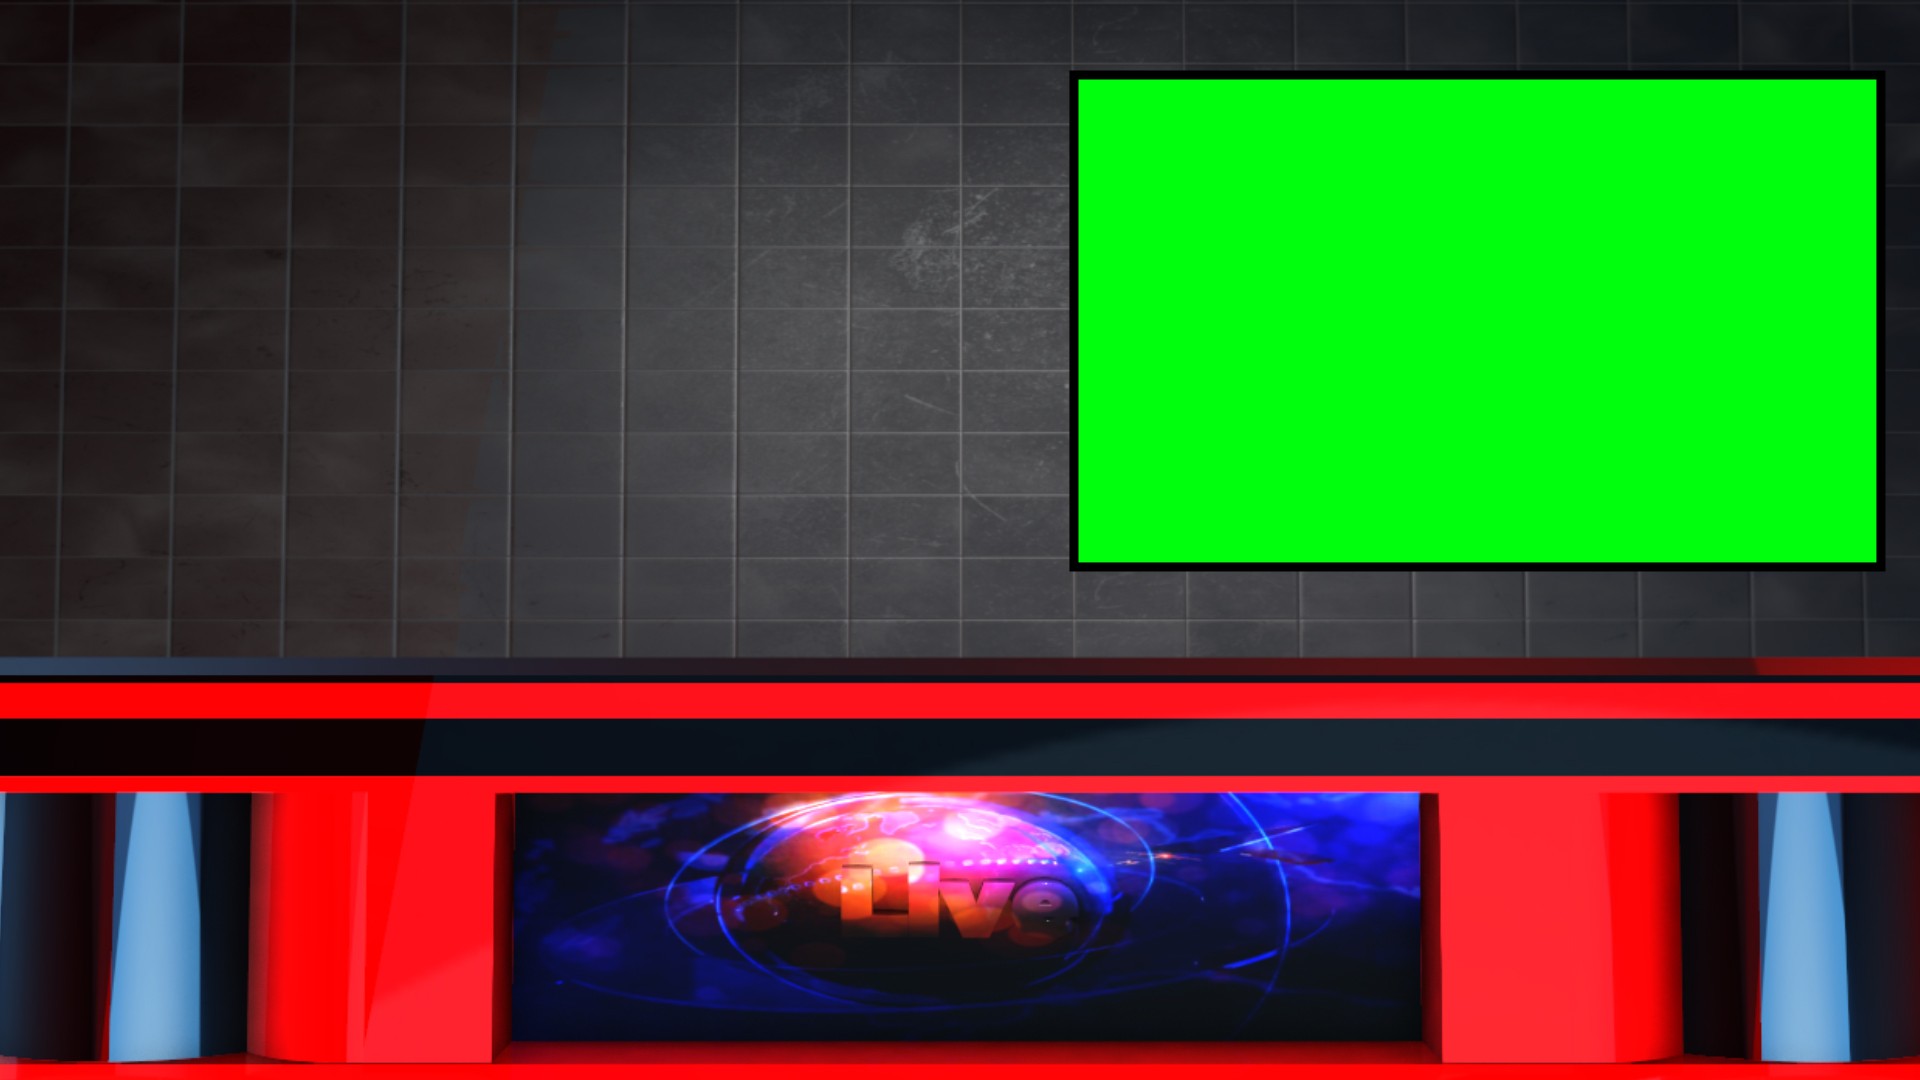 News channel table with green screen TV